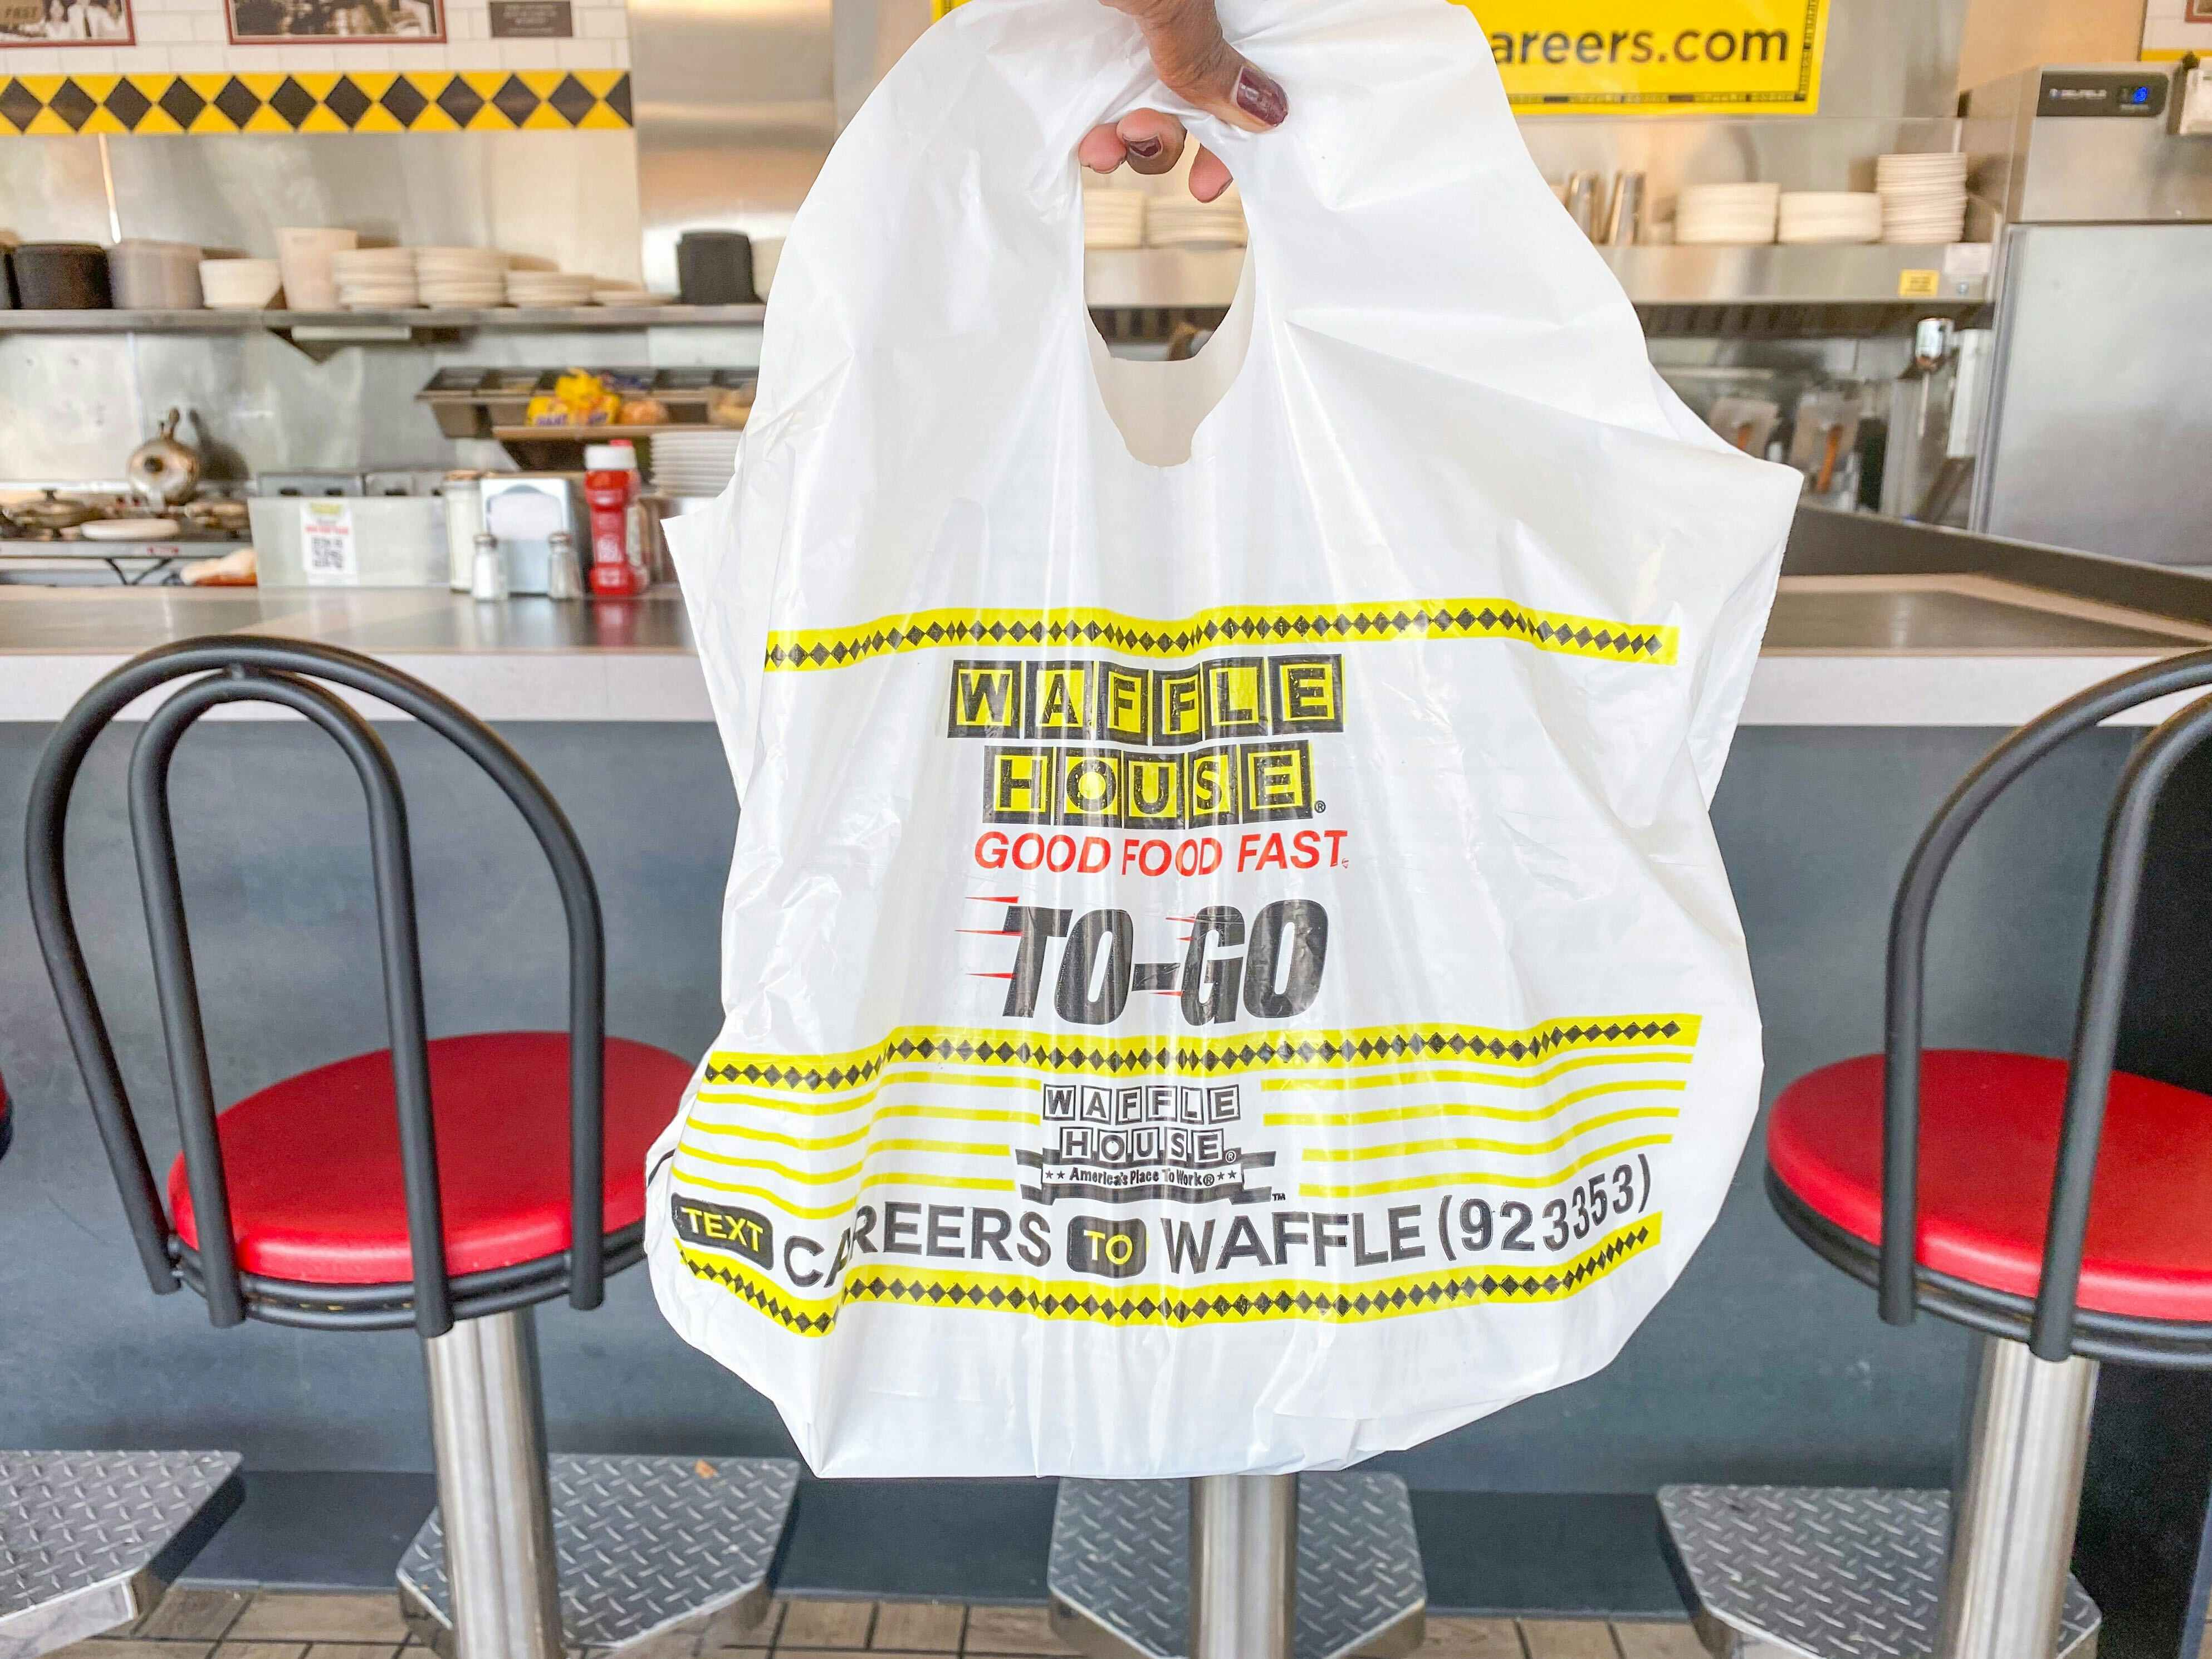 A person's hand holding up a Waffle House takeout bag in front of the counter at Waffle House.